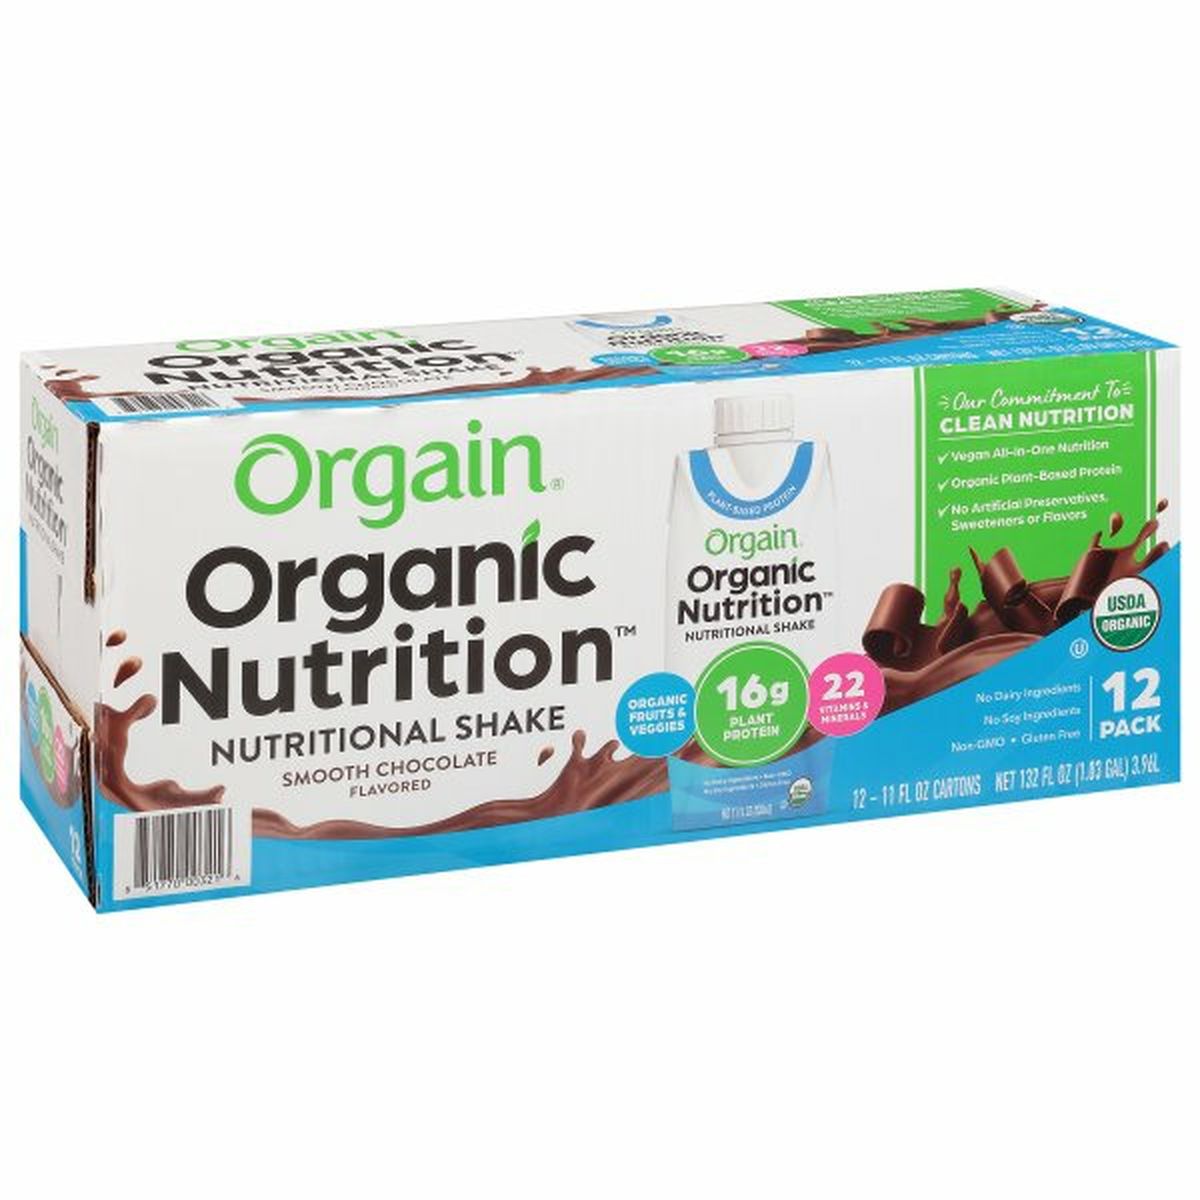 Calories in Orgain Organic Nutrition Nutritional Shake, Smooth Chocolate Flavored